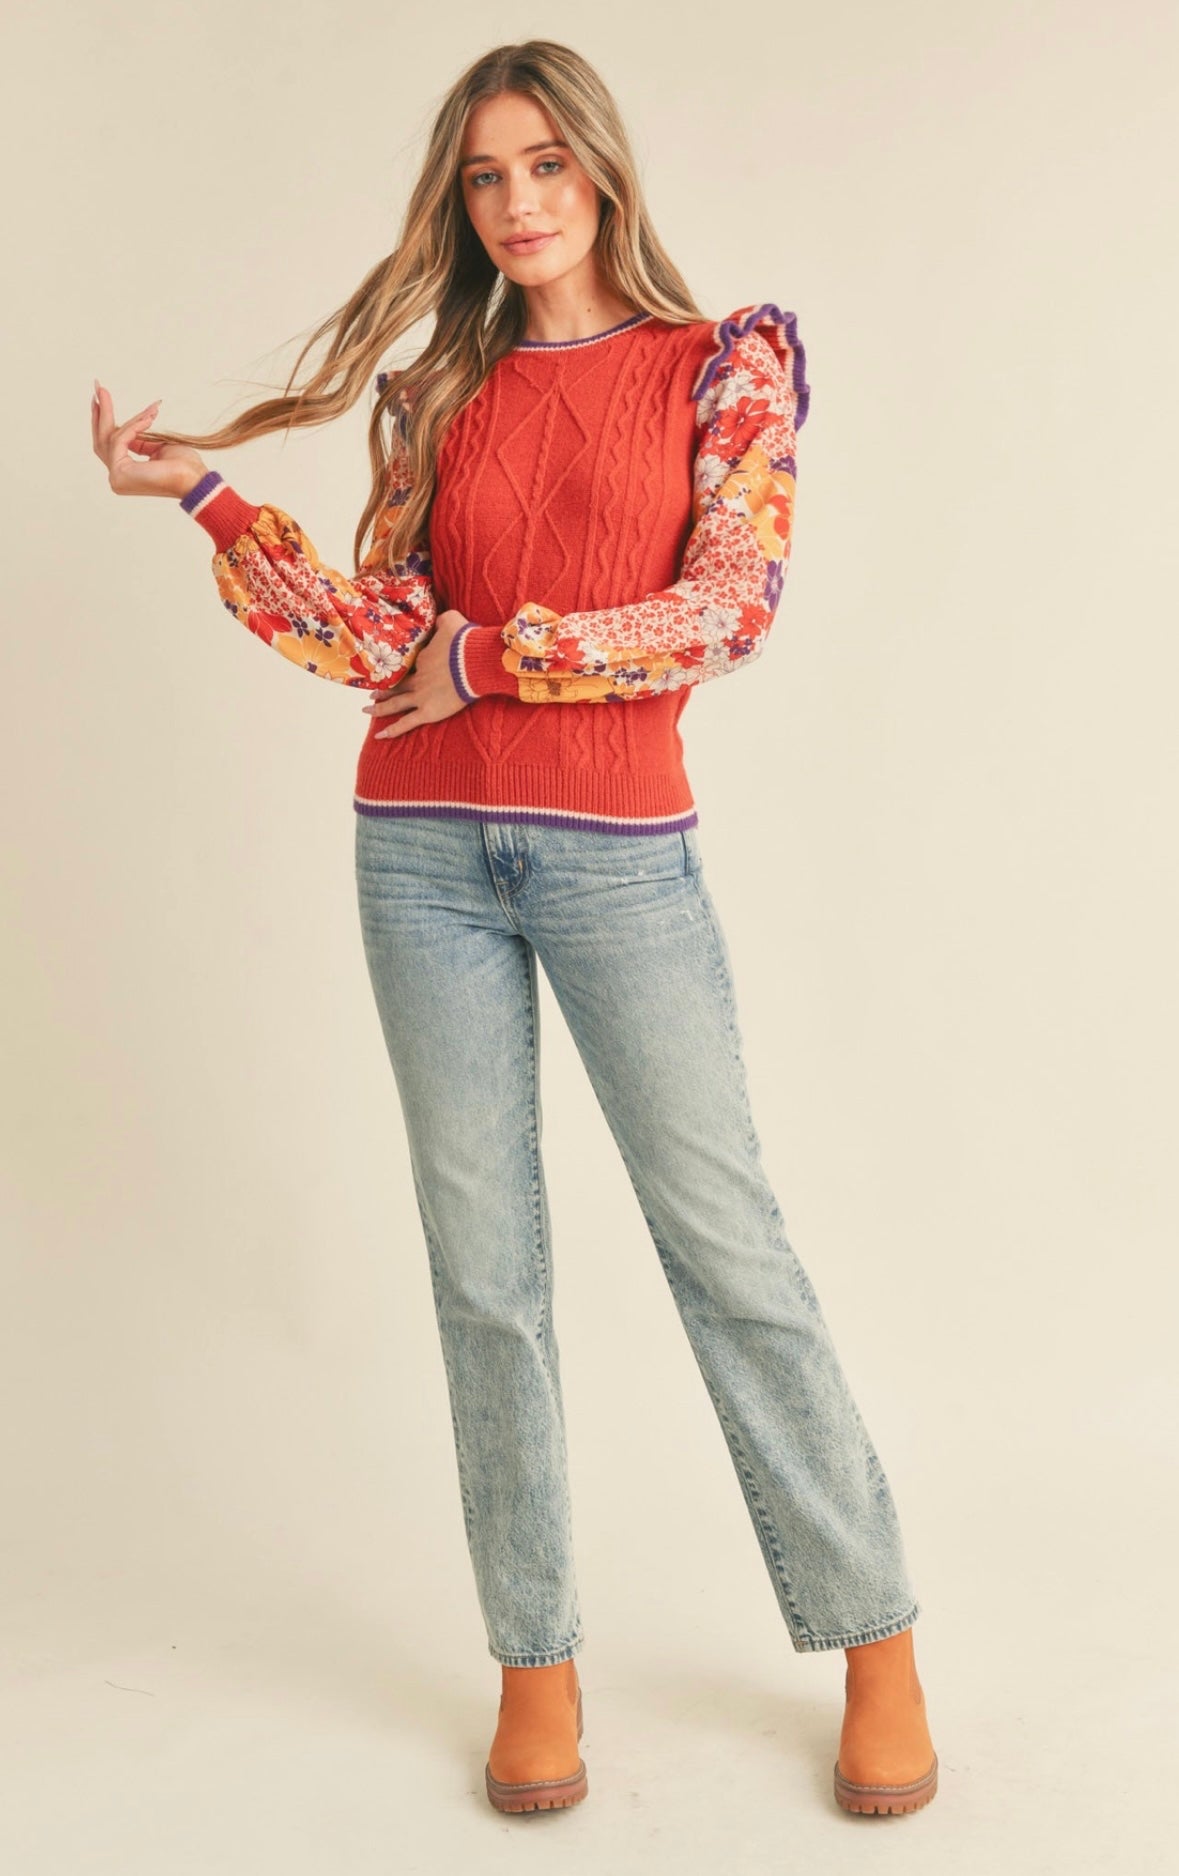 Cable knit sweater with woven floral sleeves